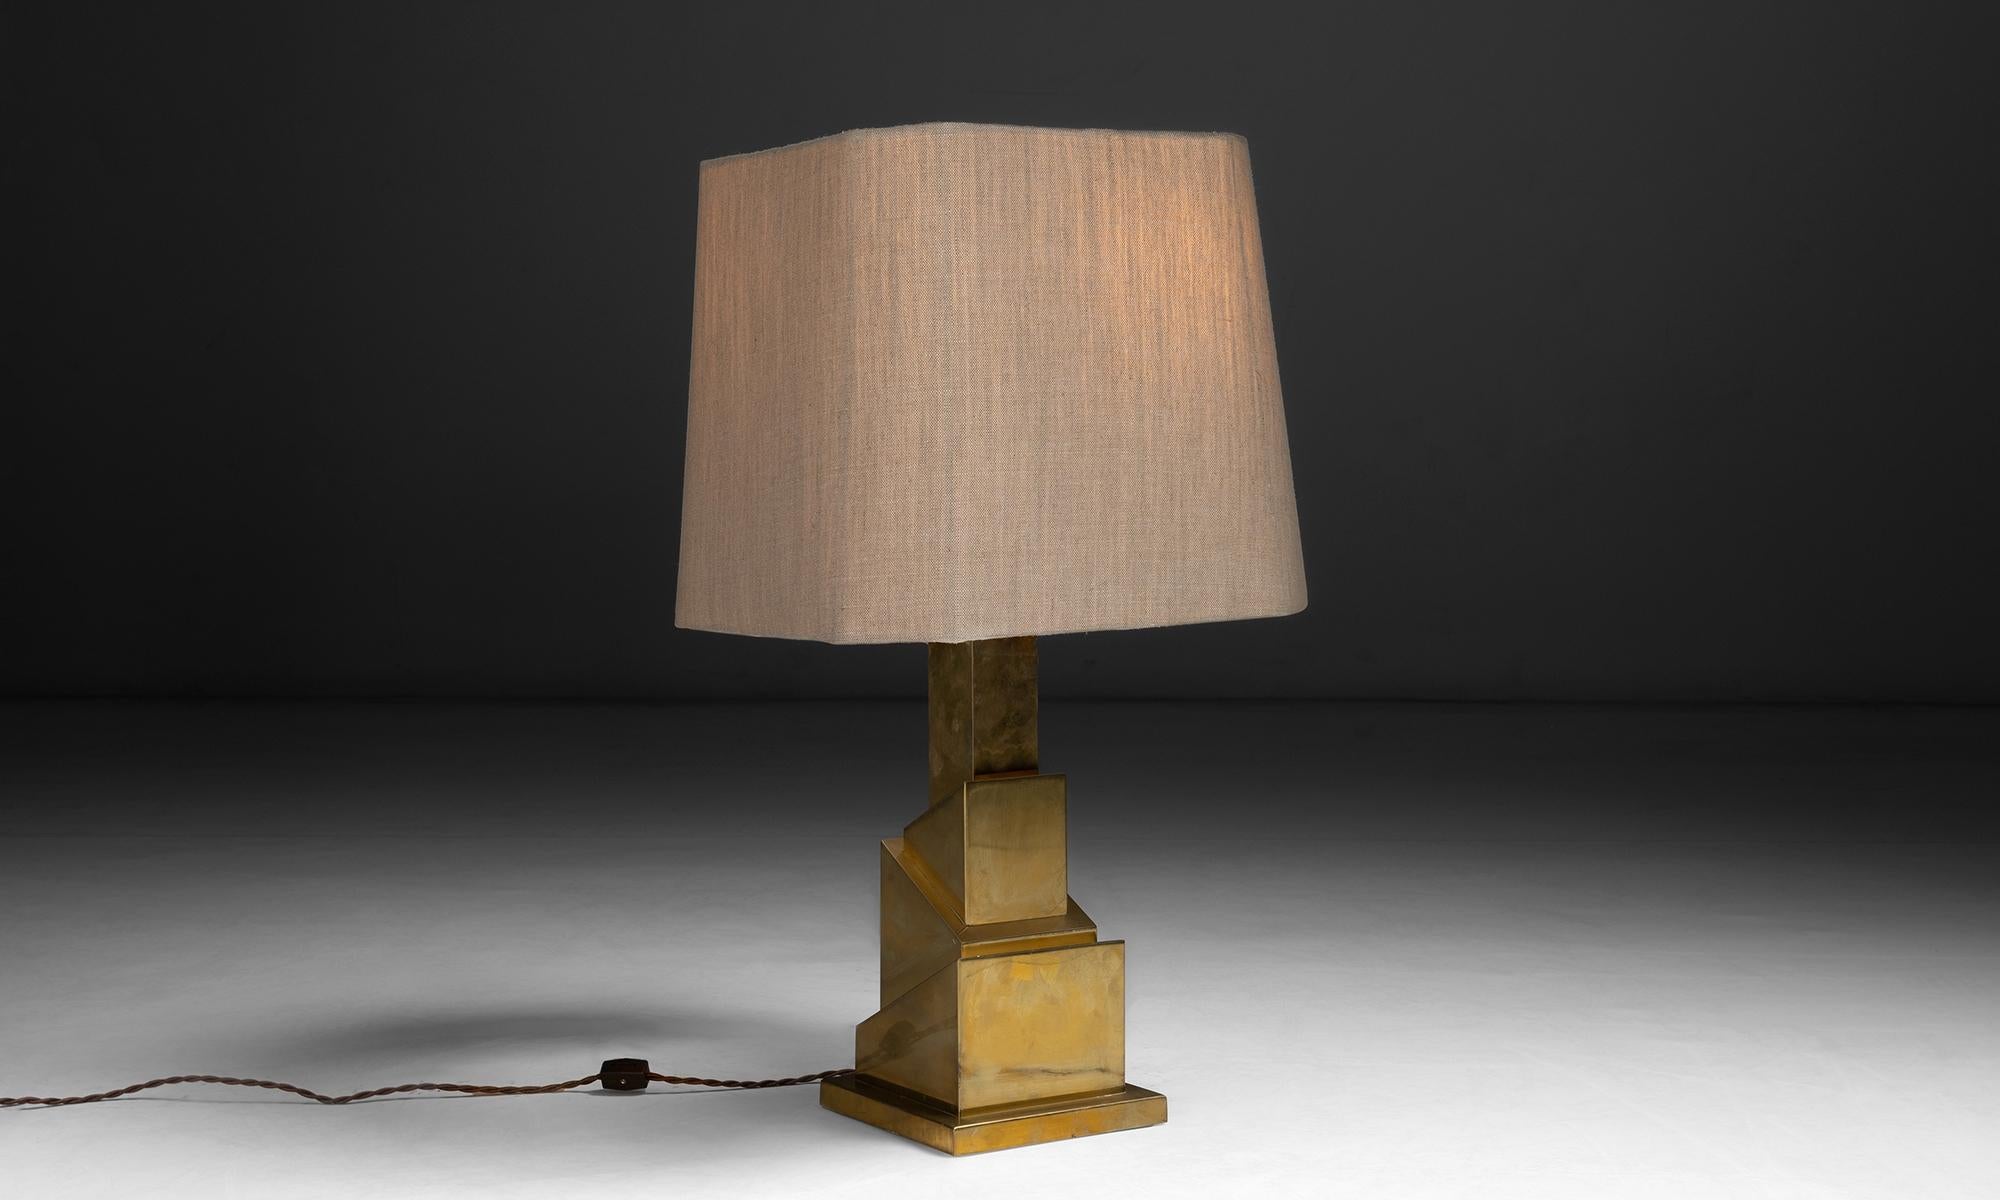 Romeo Rega table lamp.

Italy circa 1970

Brass table lamp with architectural form, stamped 'Romeo Rega made in Italy'.

Measures: 13.5”L x 13.5”D x 29”H.

